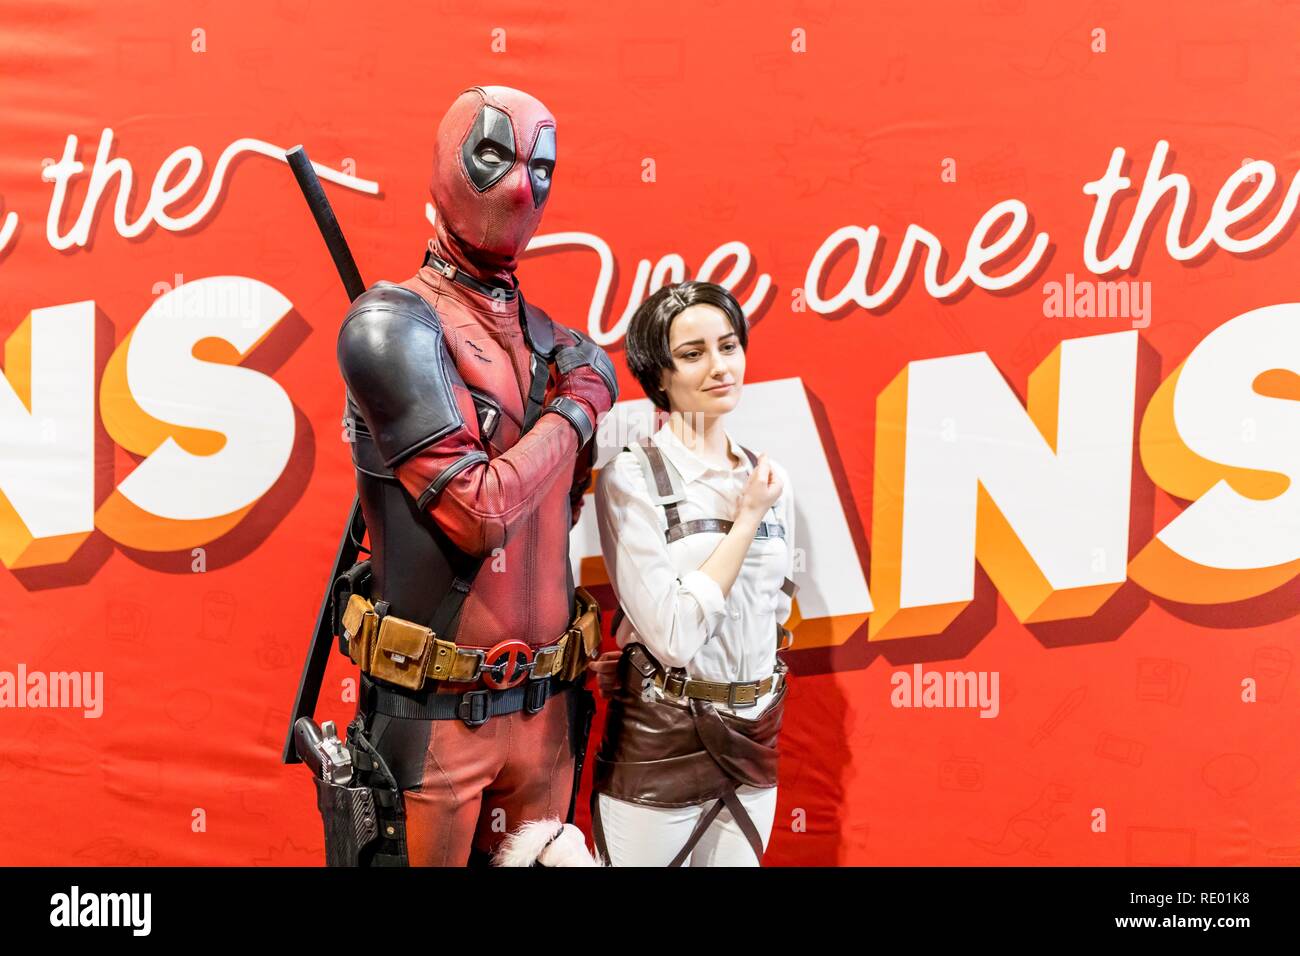 Birmingham, UK - March 17, 2018. Young boy comicon fan poses pointing gun with Marvel Comics character Deadpool in cosplay fancy dress at a comic conv Stock Photo